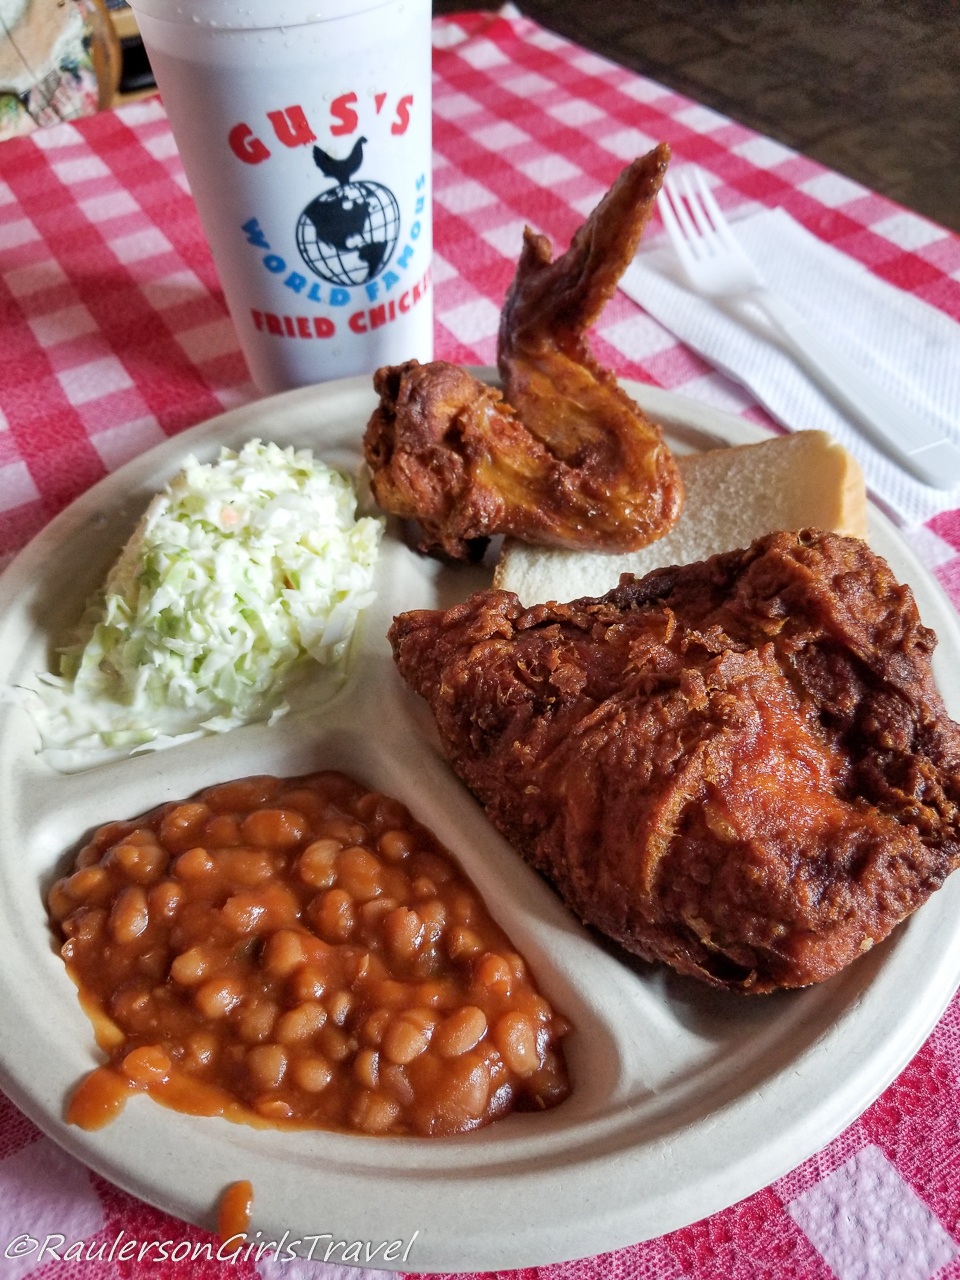 Gus's World Famous Fried Chicken, Beans, and Slaw